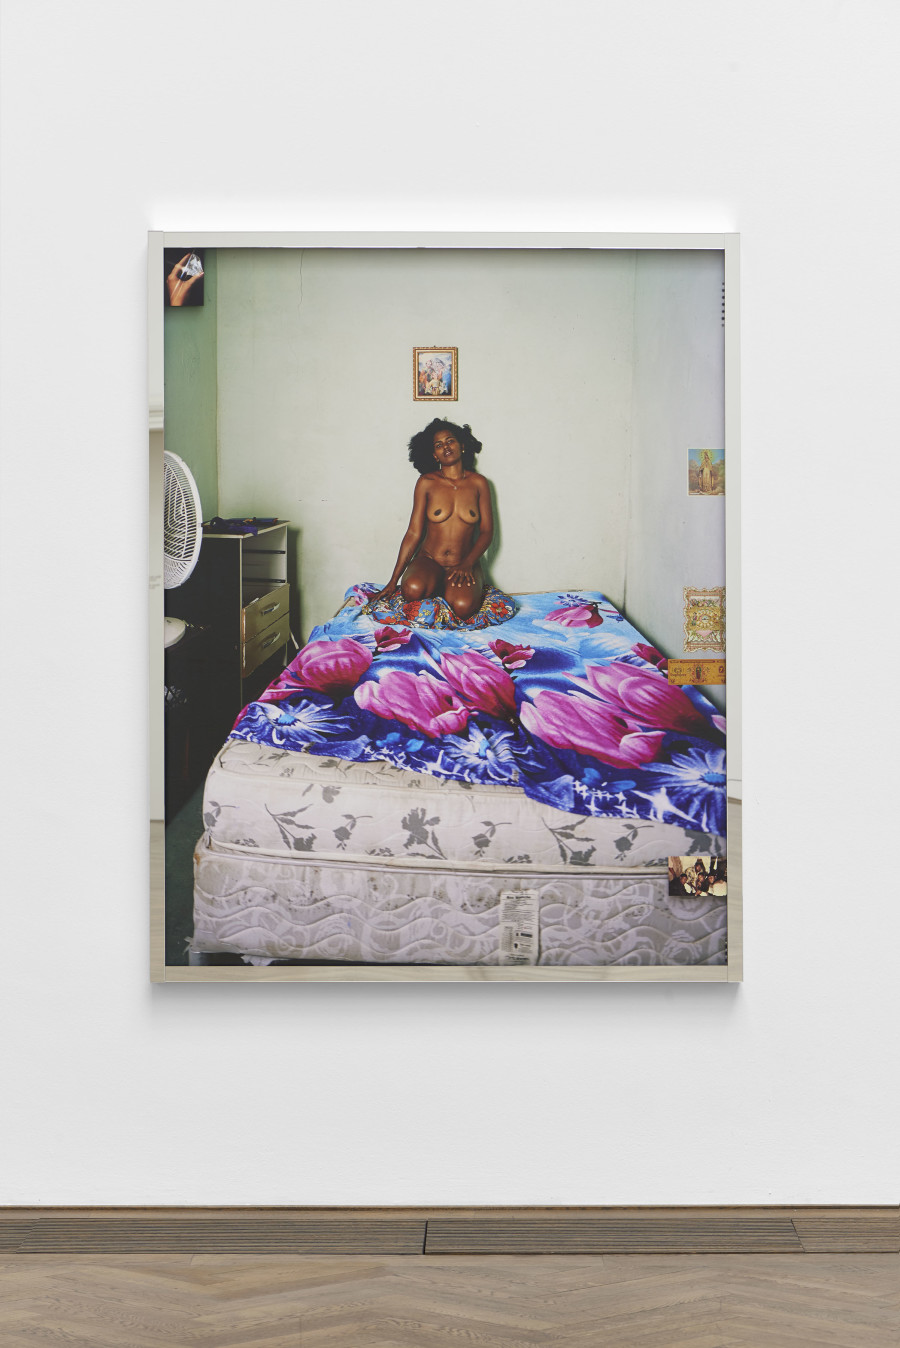 Deana Lawson, installation view, Centropy, Kunsthalle Basel, 2020, view on House of My Deceased Lover, 2019. Photo: Philipp Hänger / Kunsthalle Basel